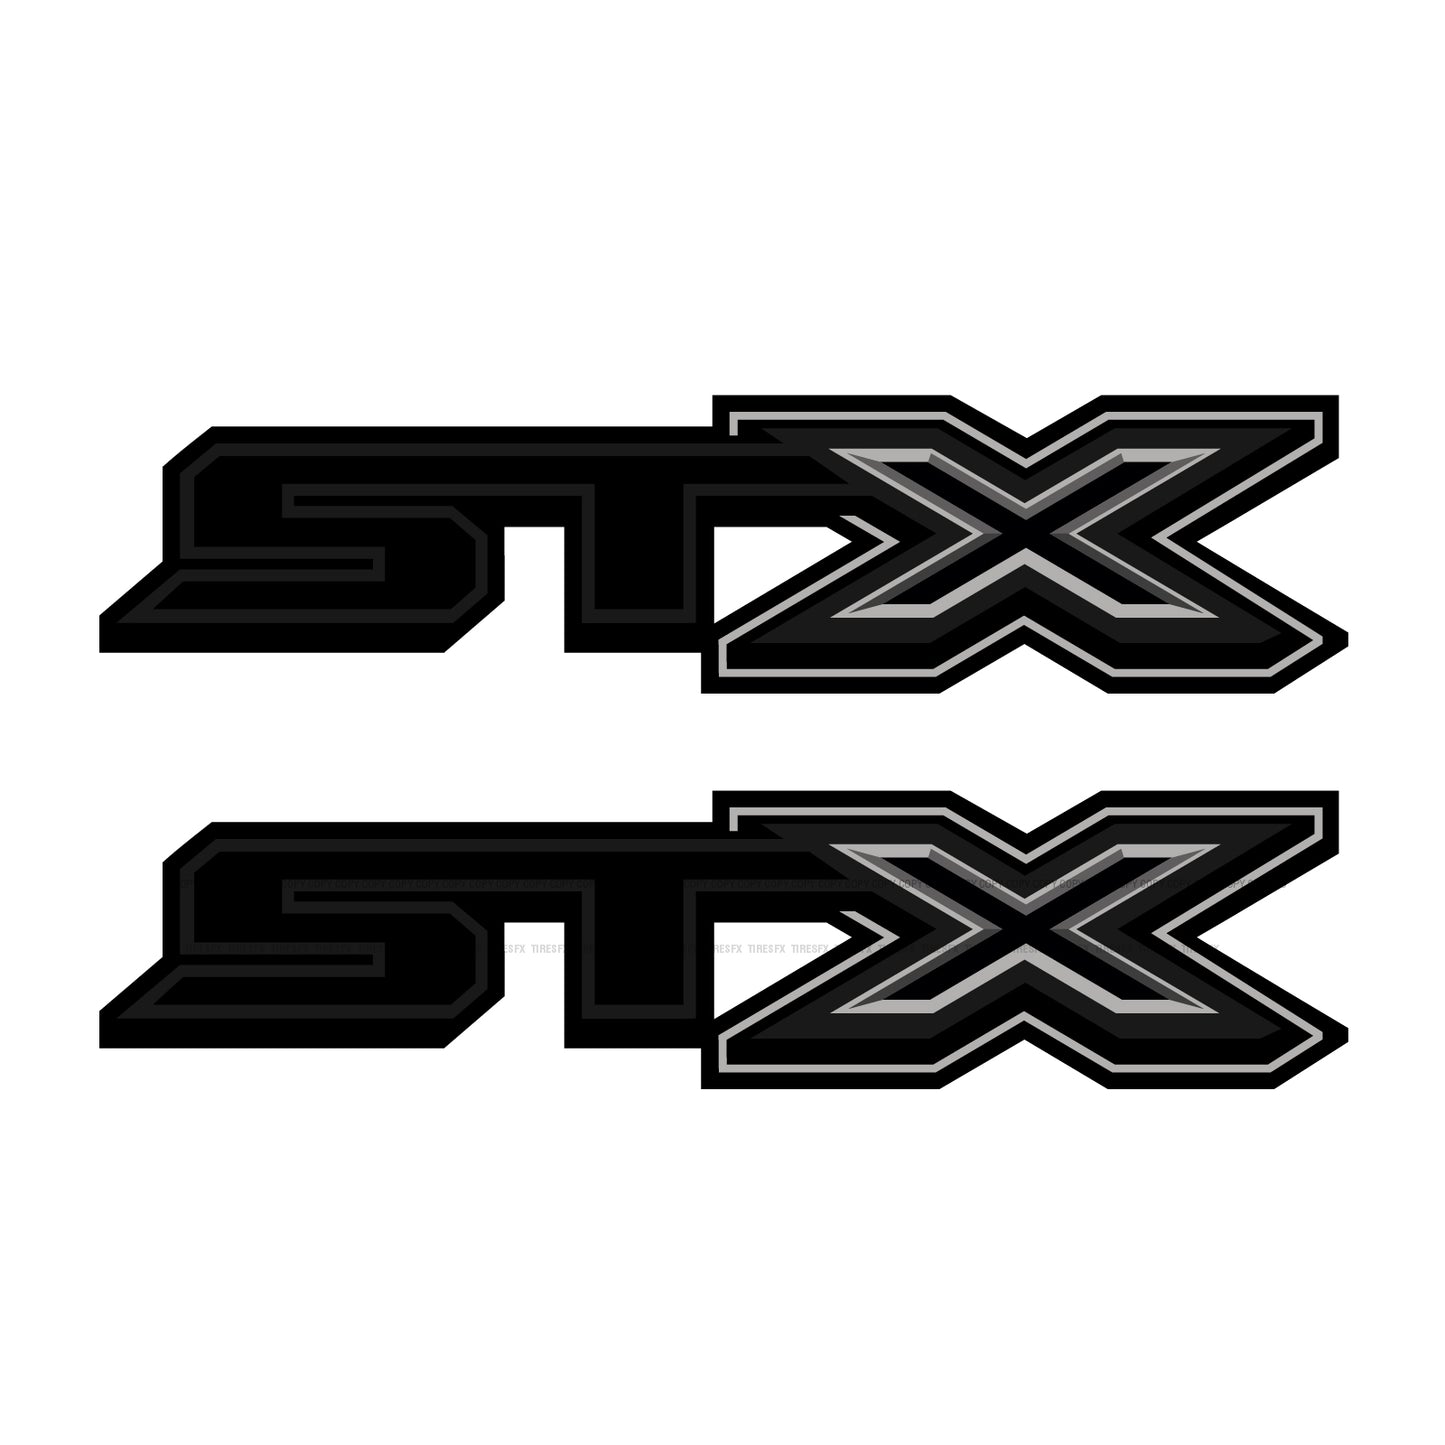 STX Decals Replacement Stickers Ford Bedside